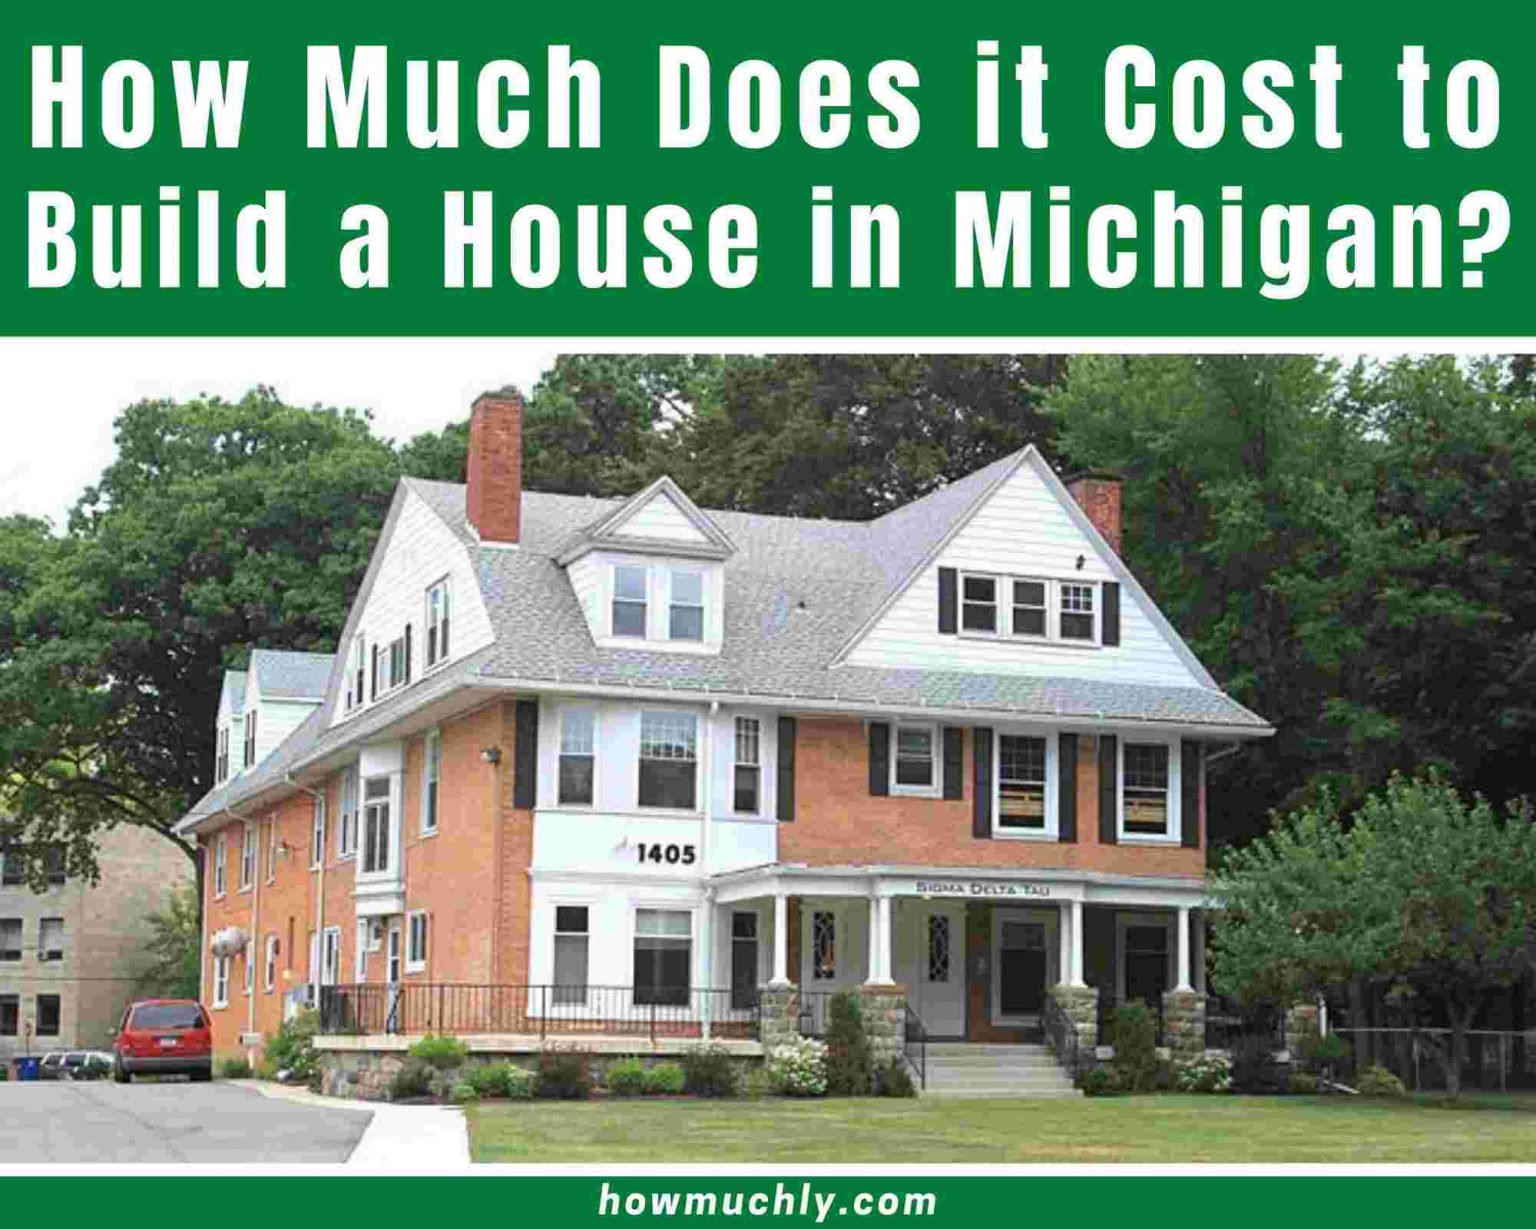 How Much Does it Cost to Build a House in Michigan? MI 2022